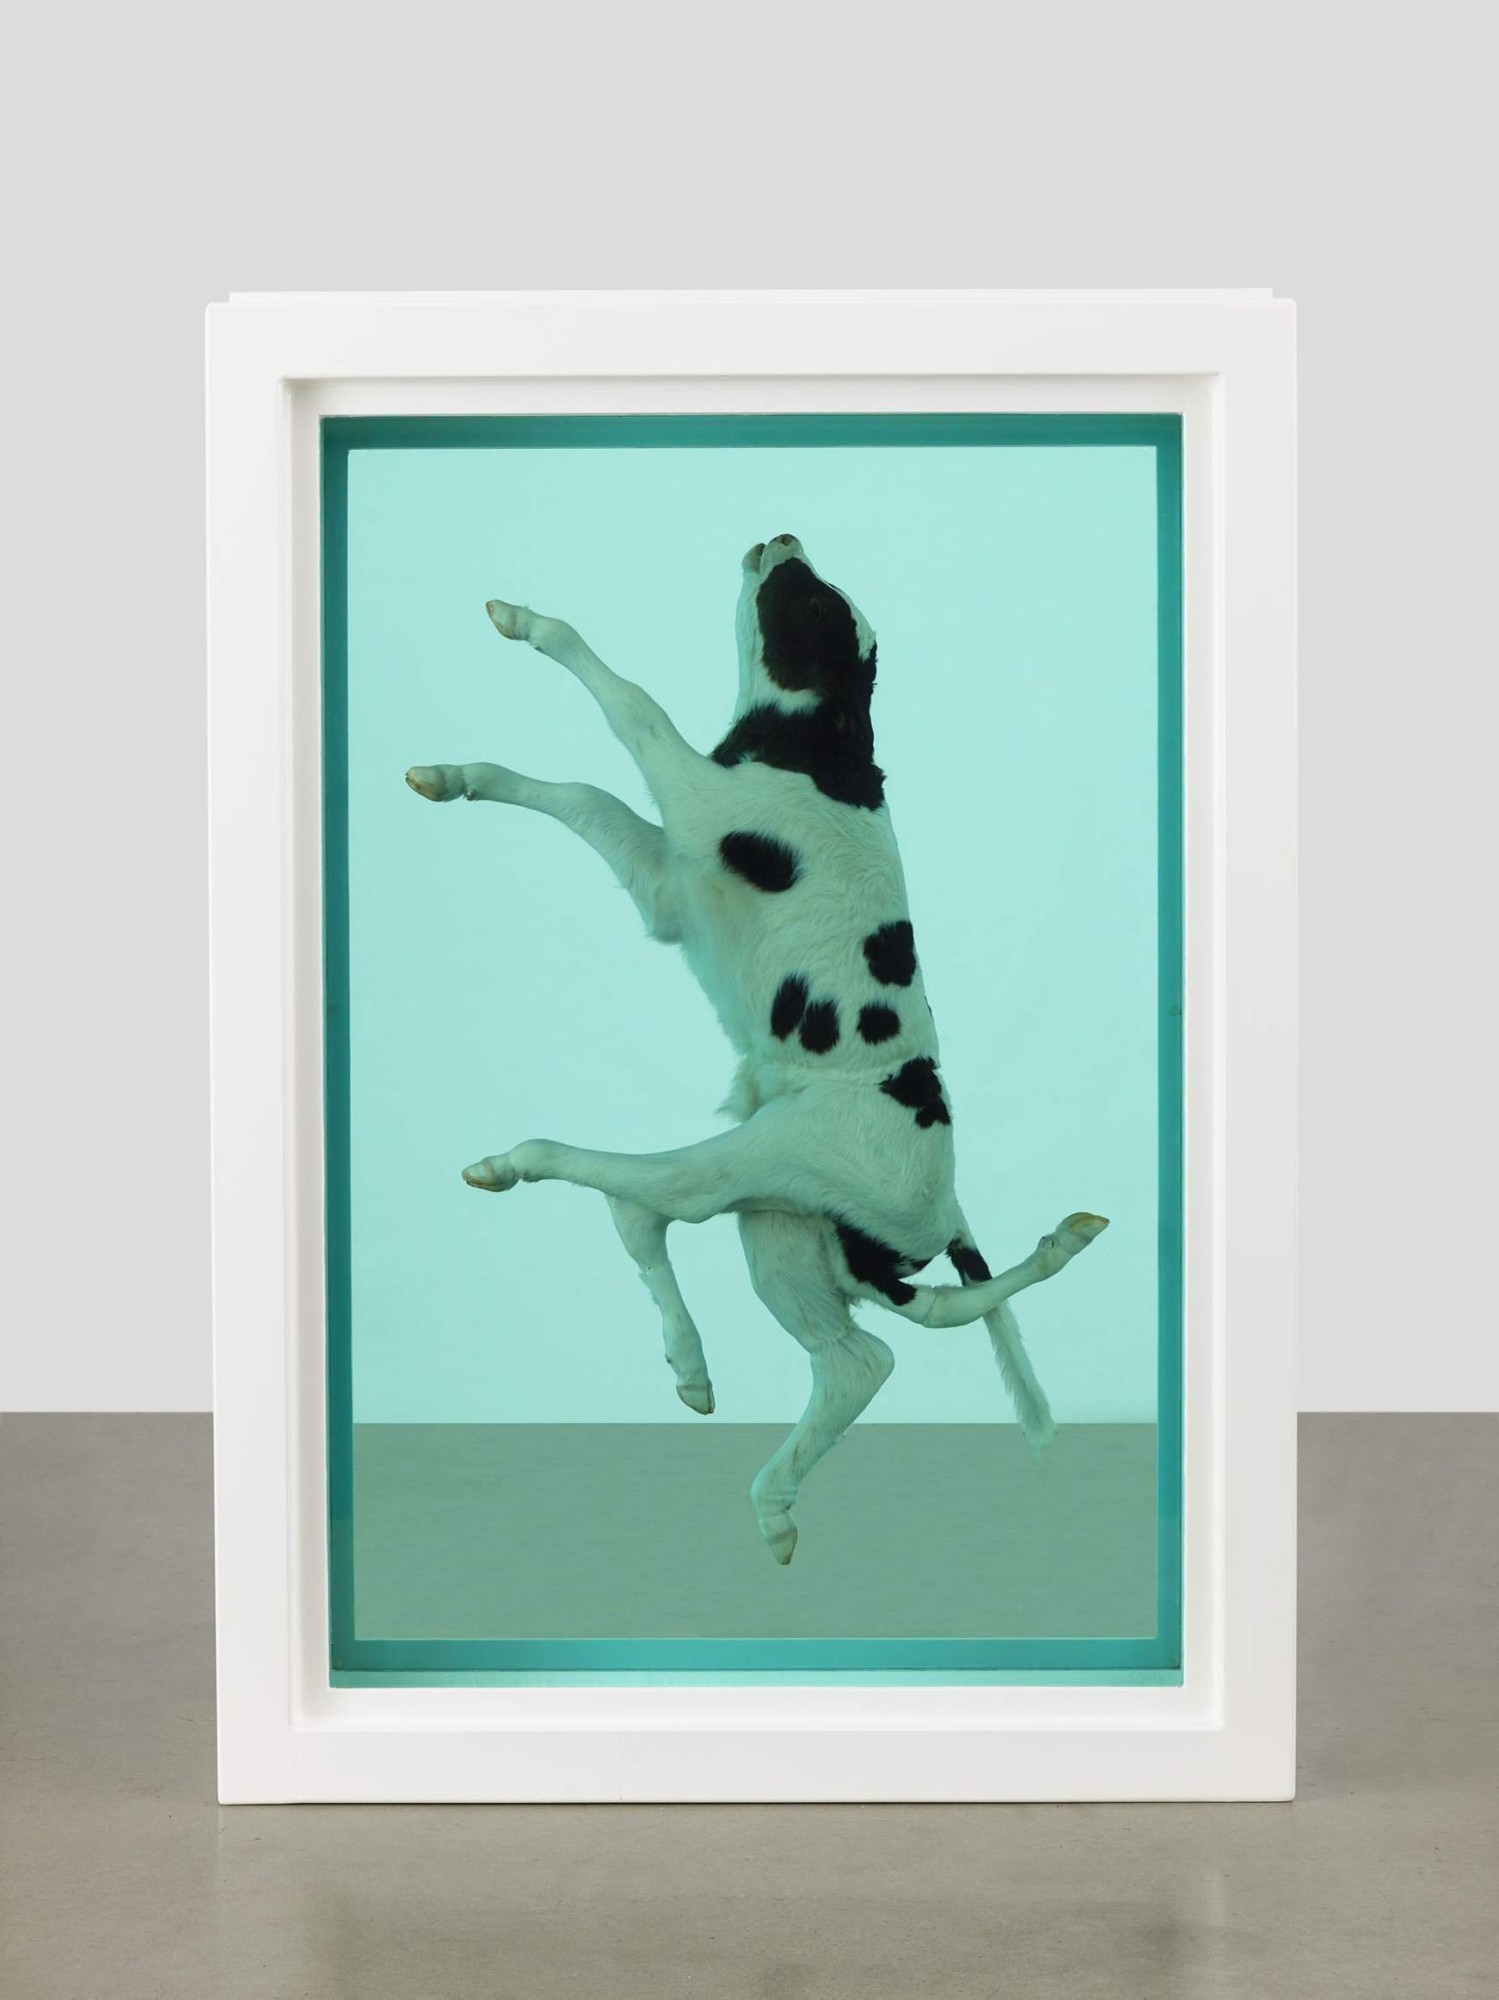 The Ascension, Damien Hirst. Photos par Prudence Cuming Associates Ltd. © Damien Hirst and Science Ltd. All rights reserved, DACS/Artimage 2023